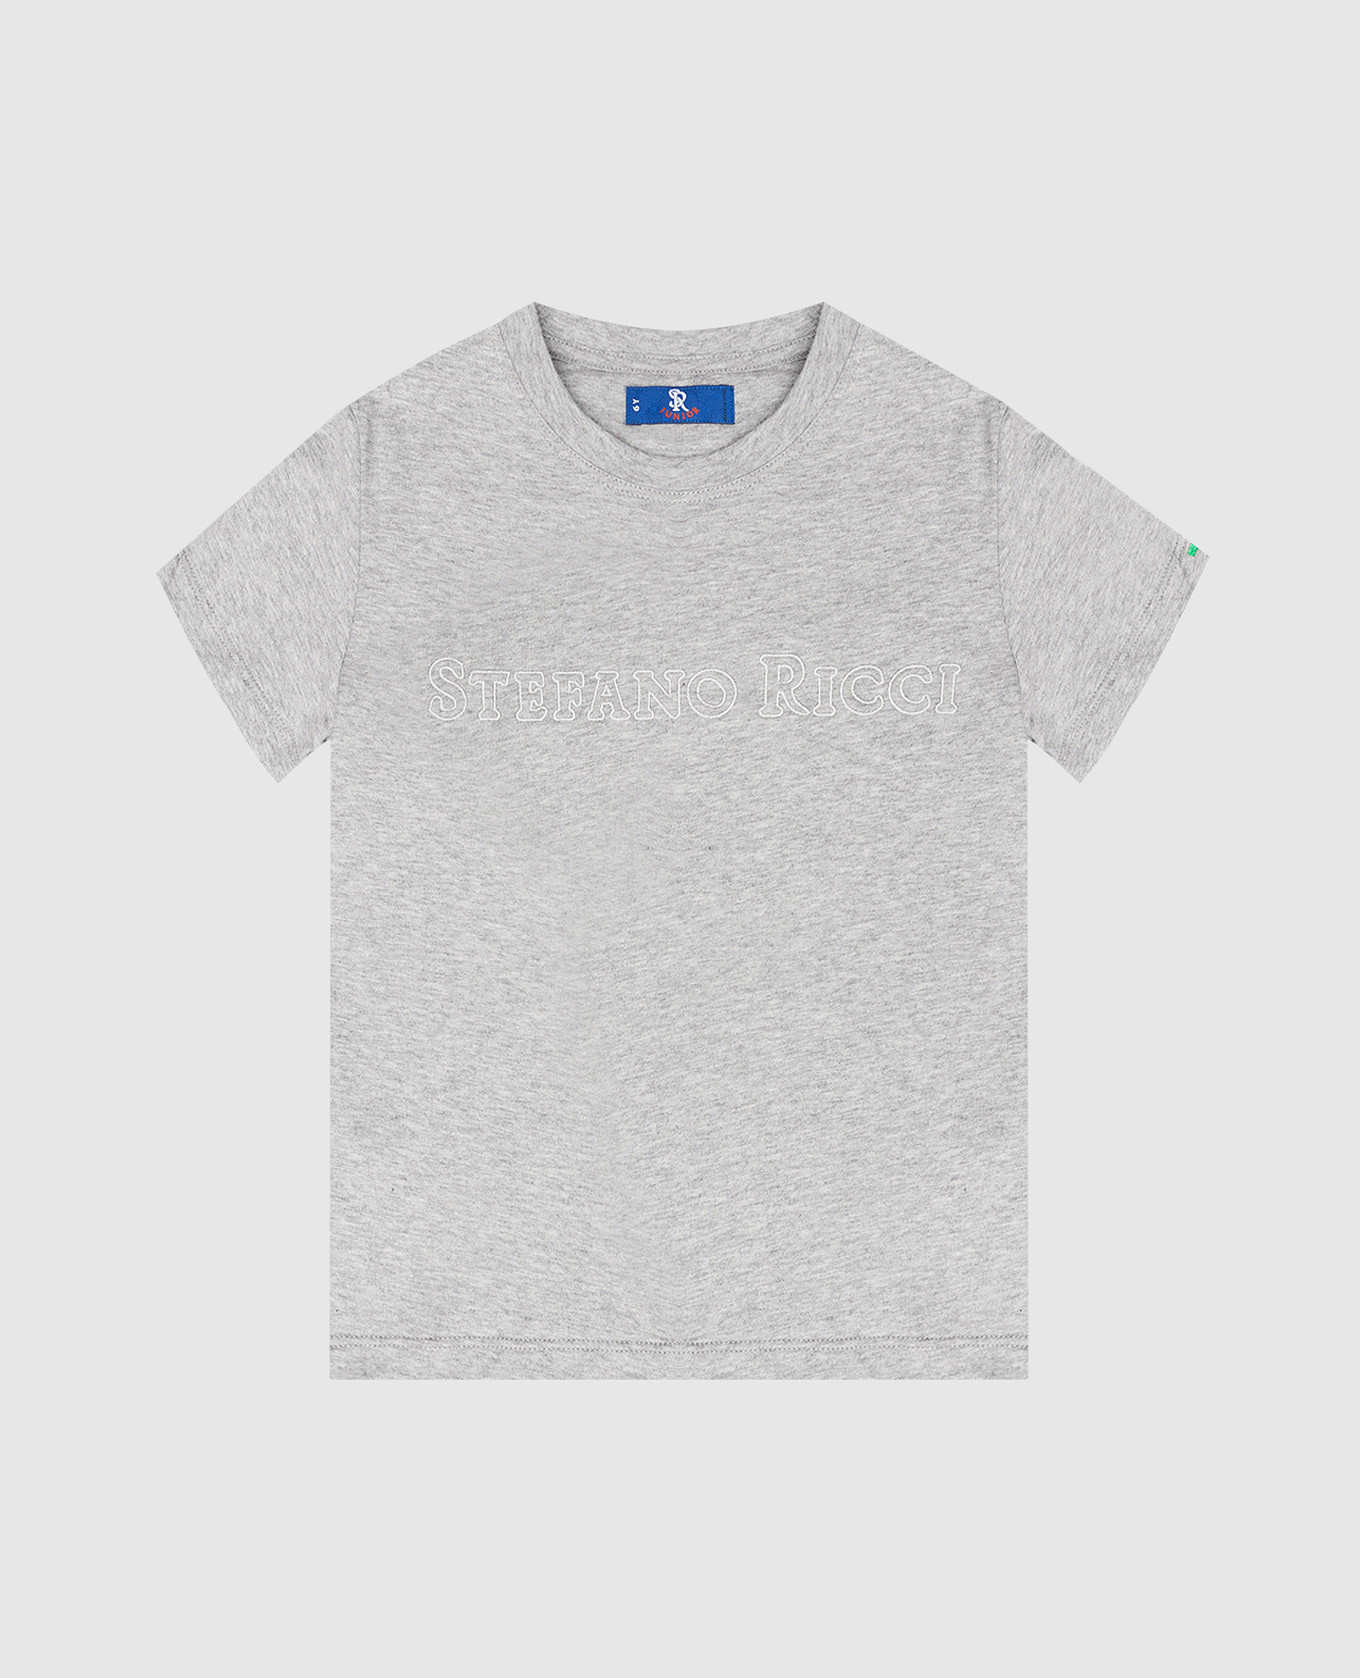 Gray T-shirt with textured logo